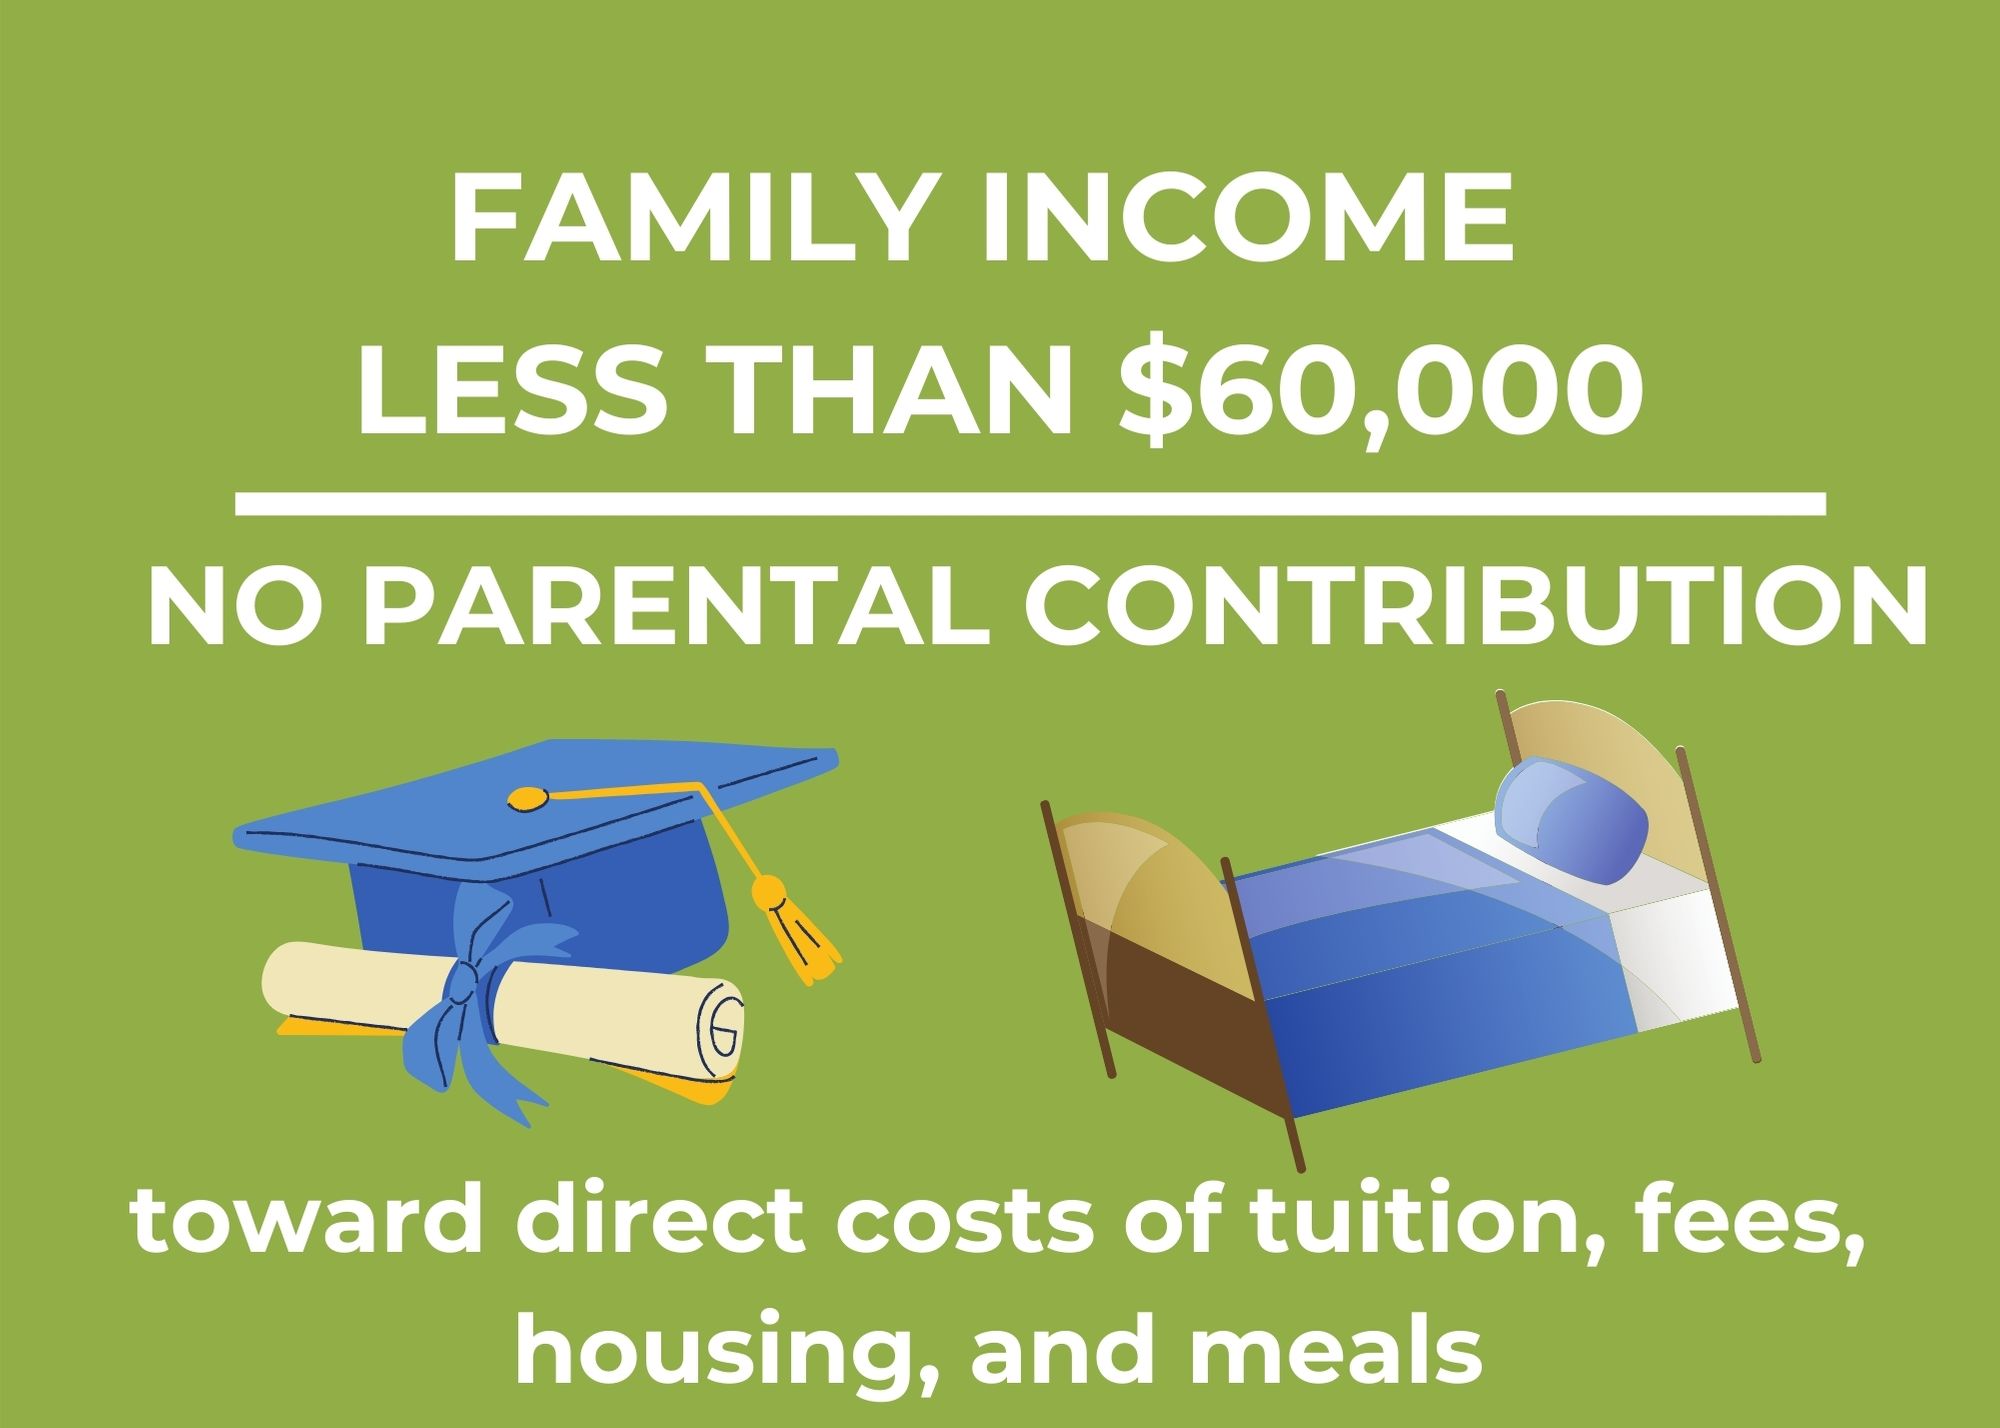 FAMILY INCOME LESS THAN $60,000